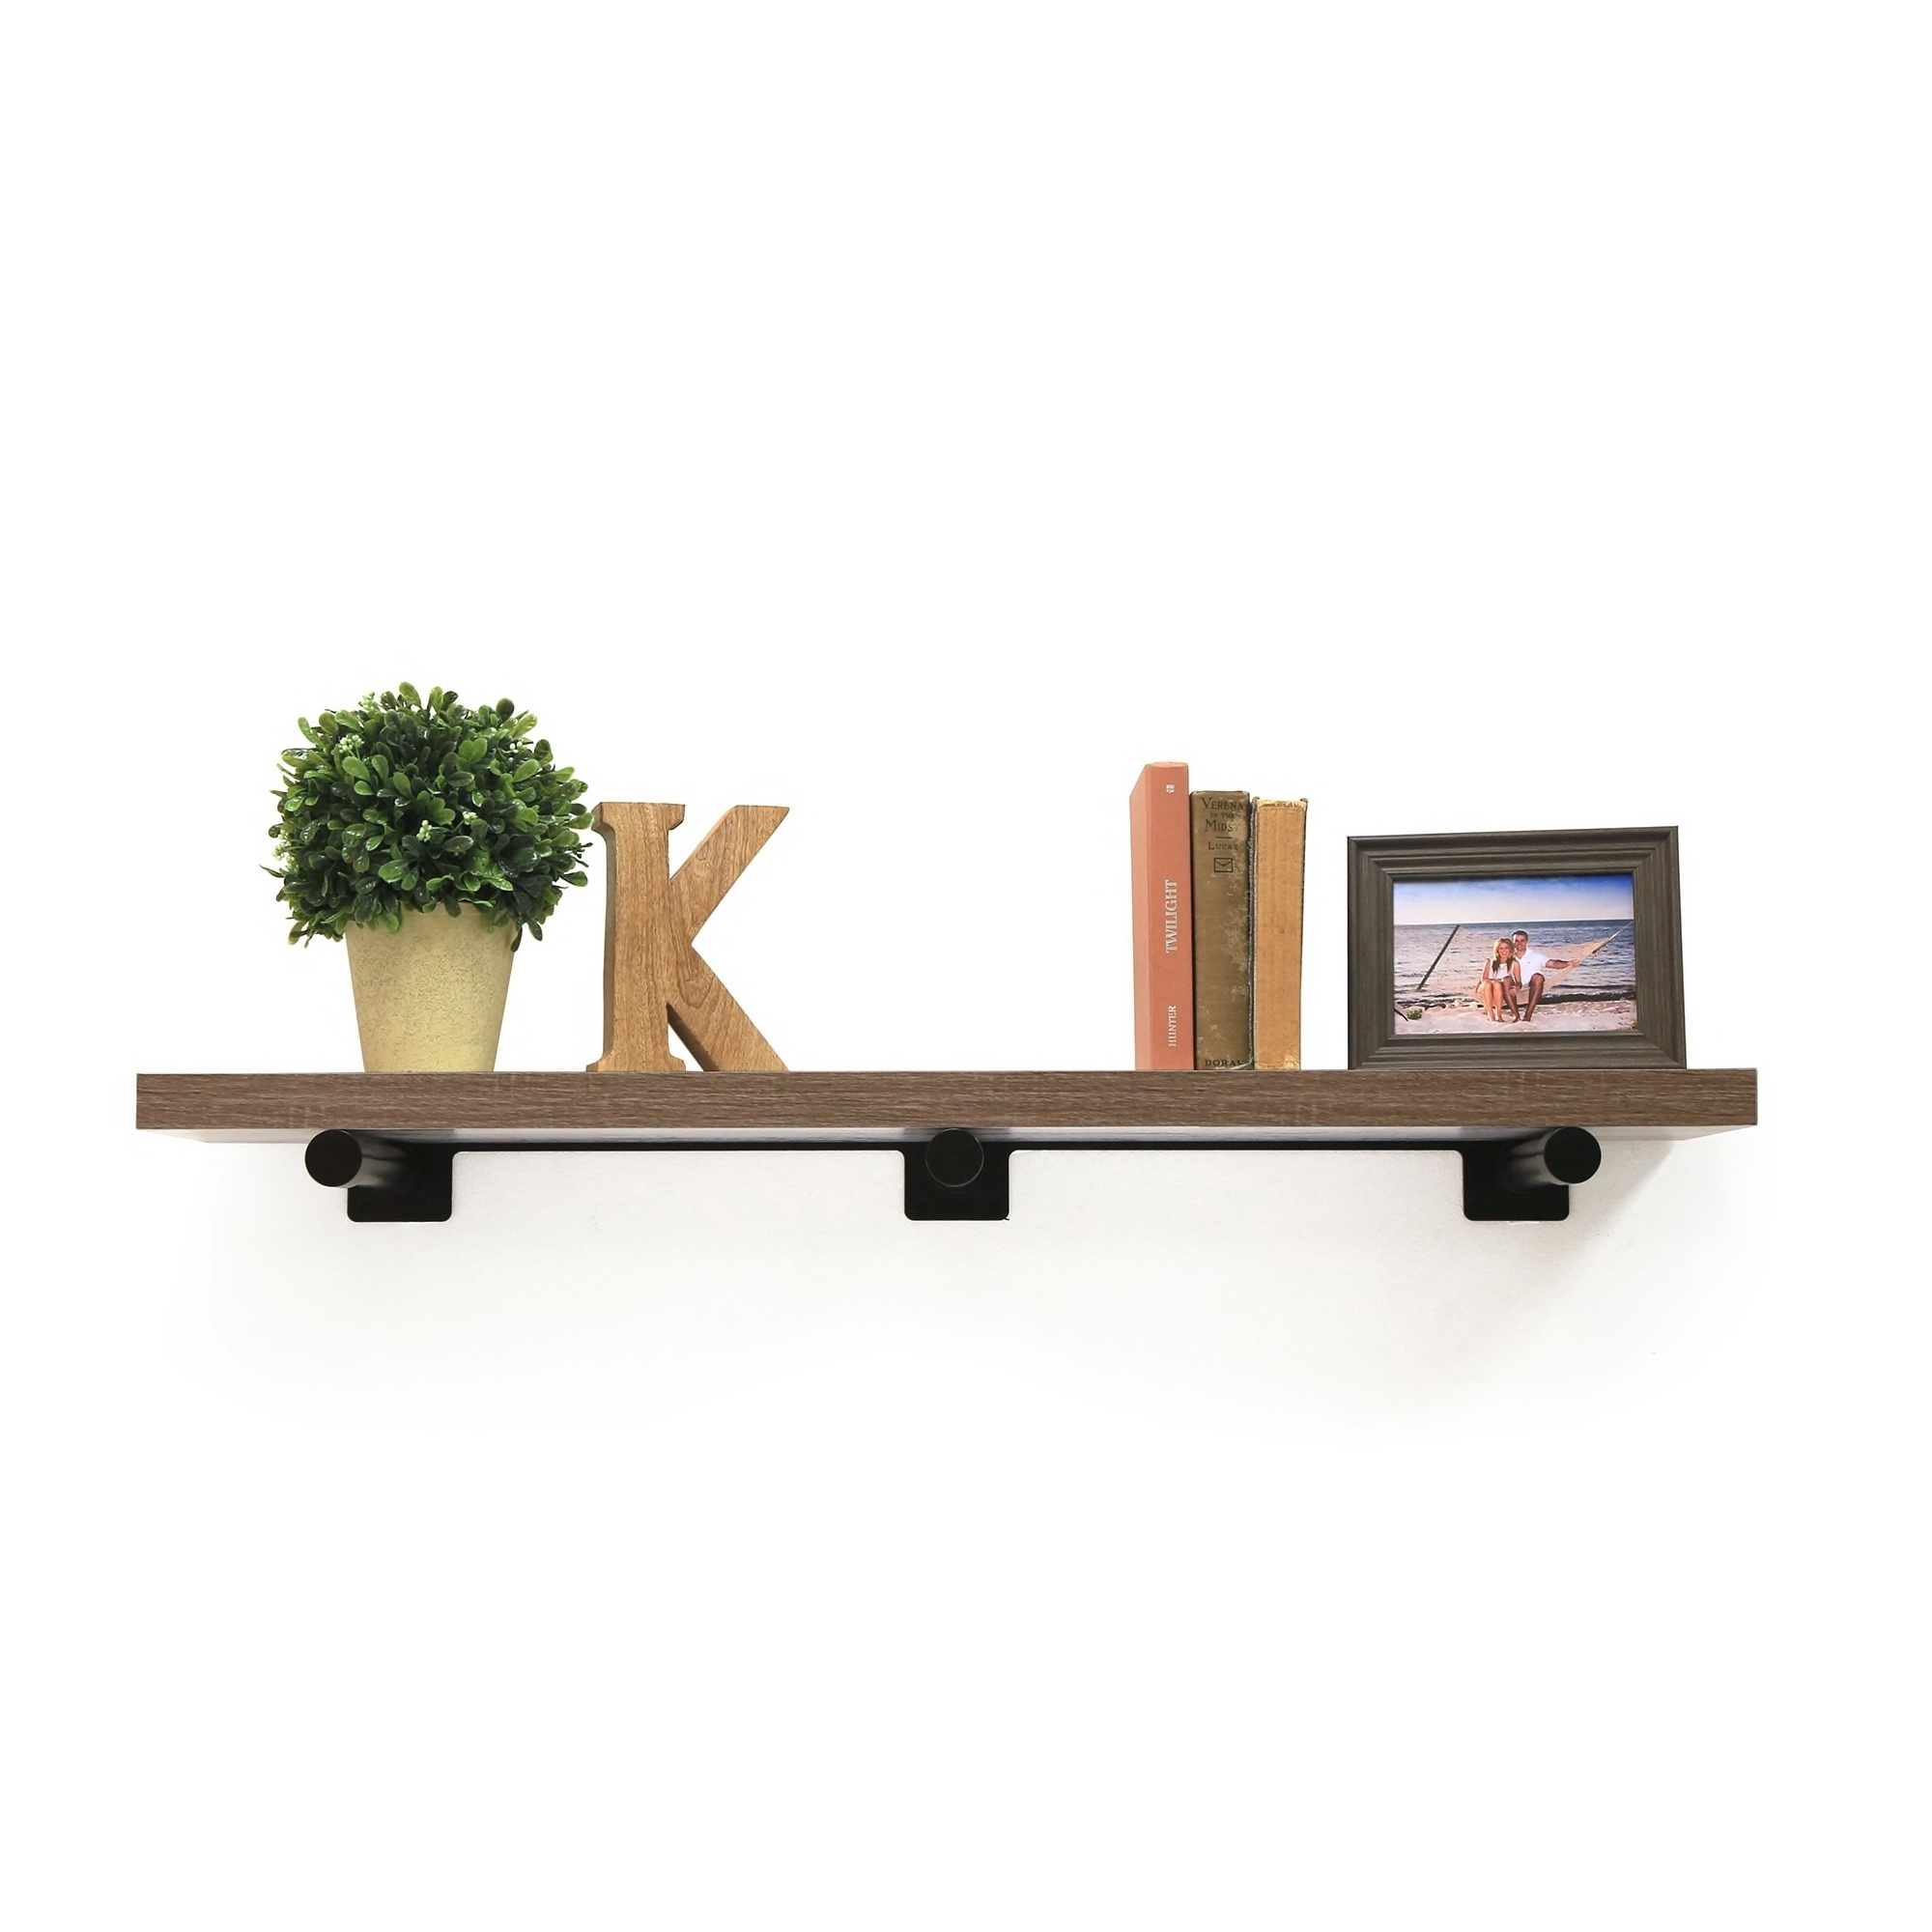 inplace inch brown driftwood shelf bracket free shipping canvas floating bathroom wall cabinet ideas shower resurfacing entryway storage portable steel shelving for receiver ikea